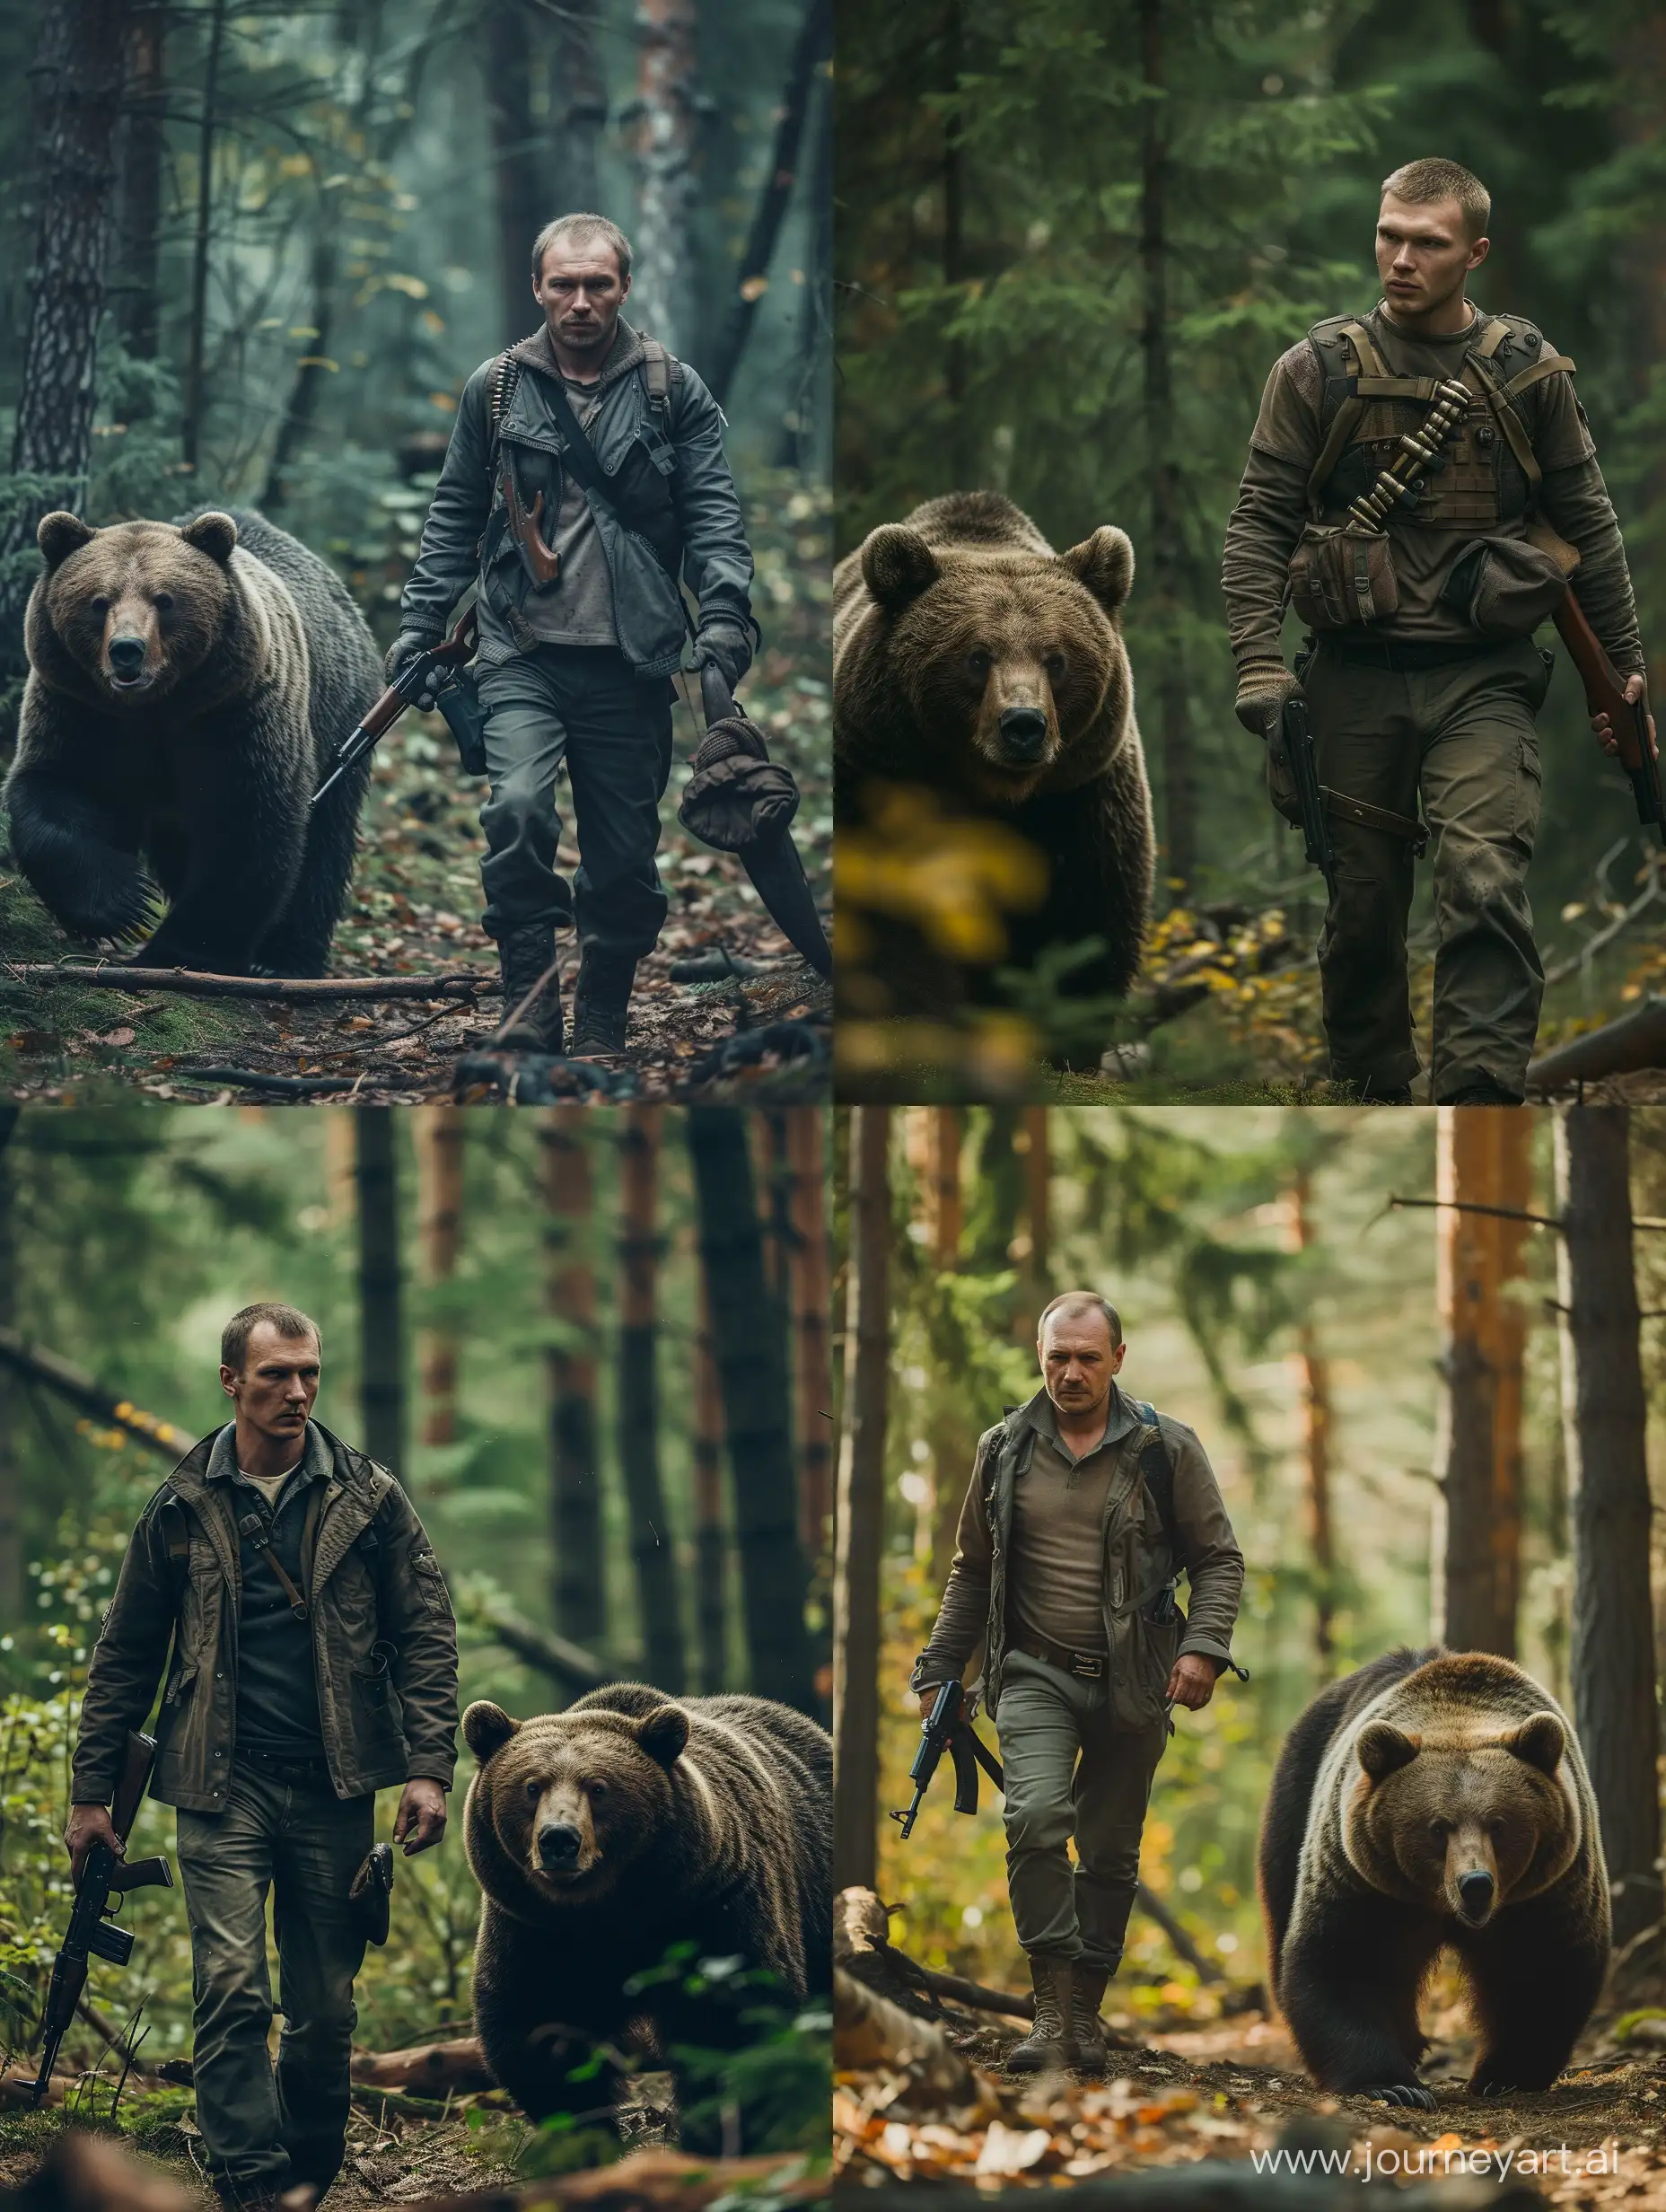 A thin Russian hunter walks through the forest with in hand gun next to a bear, his face is open and looking straight, Canon EOS 6D Mark II, ISO100, 40mm, f/4,5, 2,0c